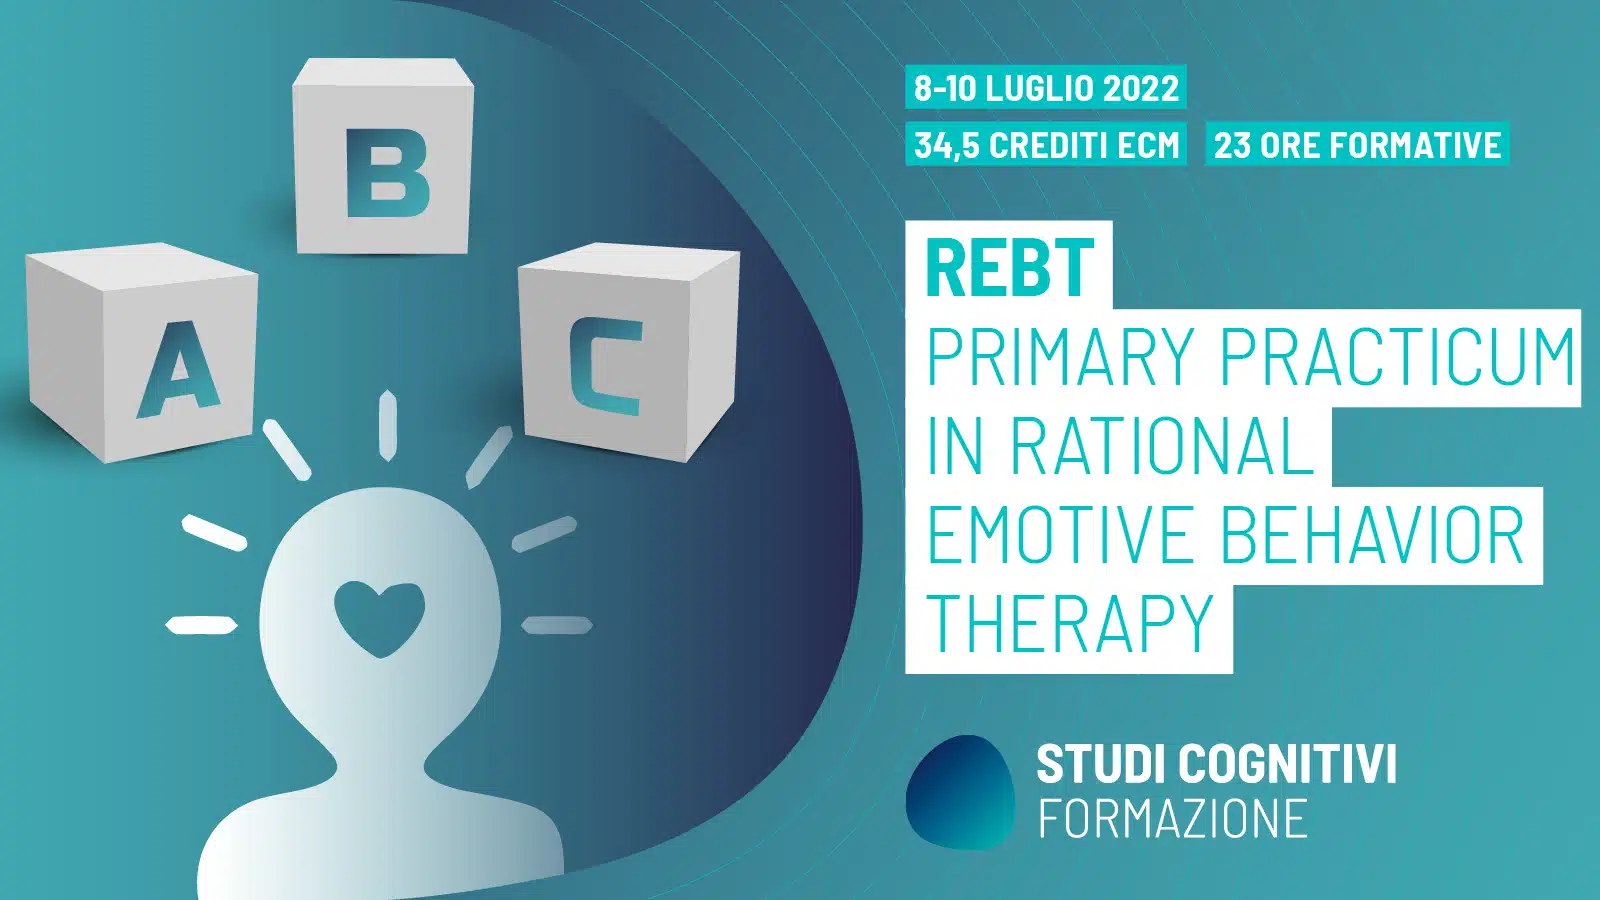 NAZIONALE - 220708 - Primary REBT - Banner